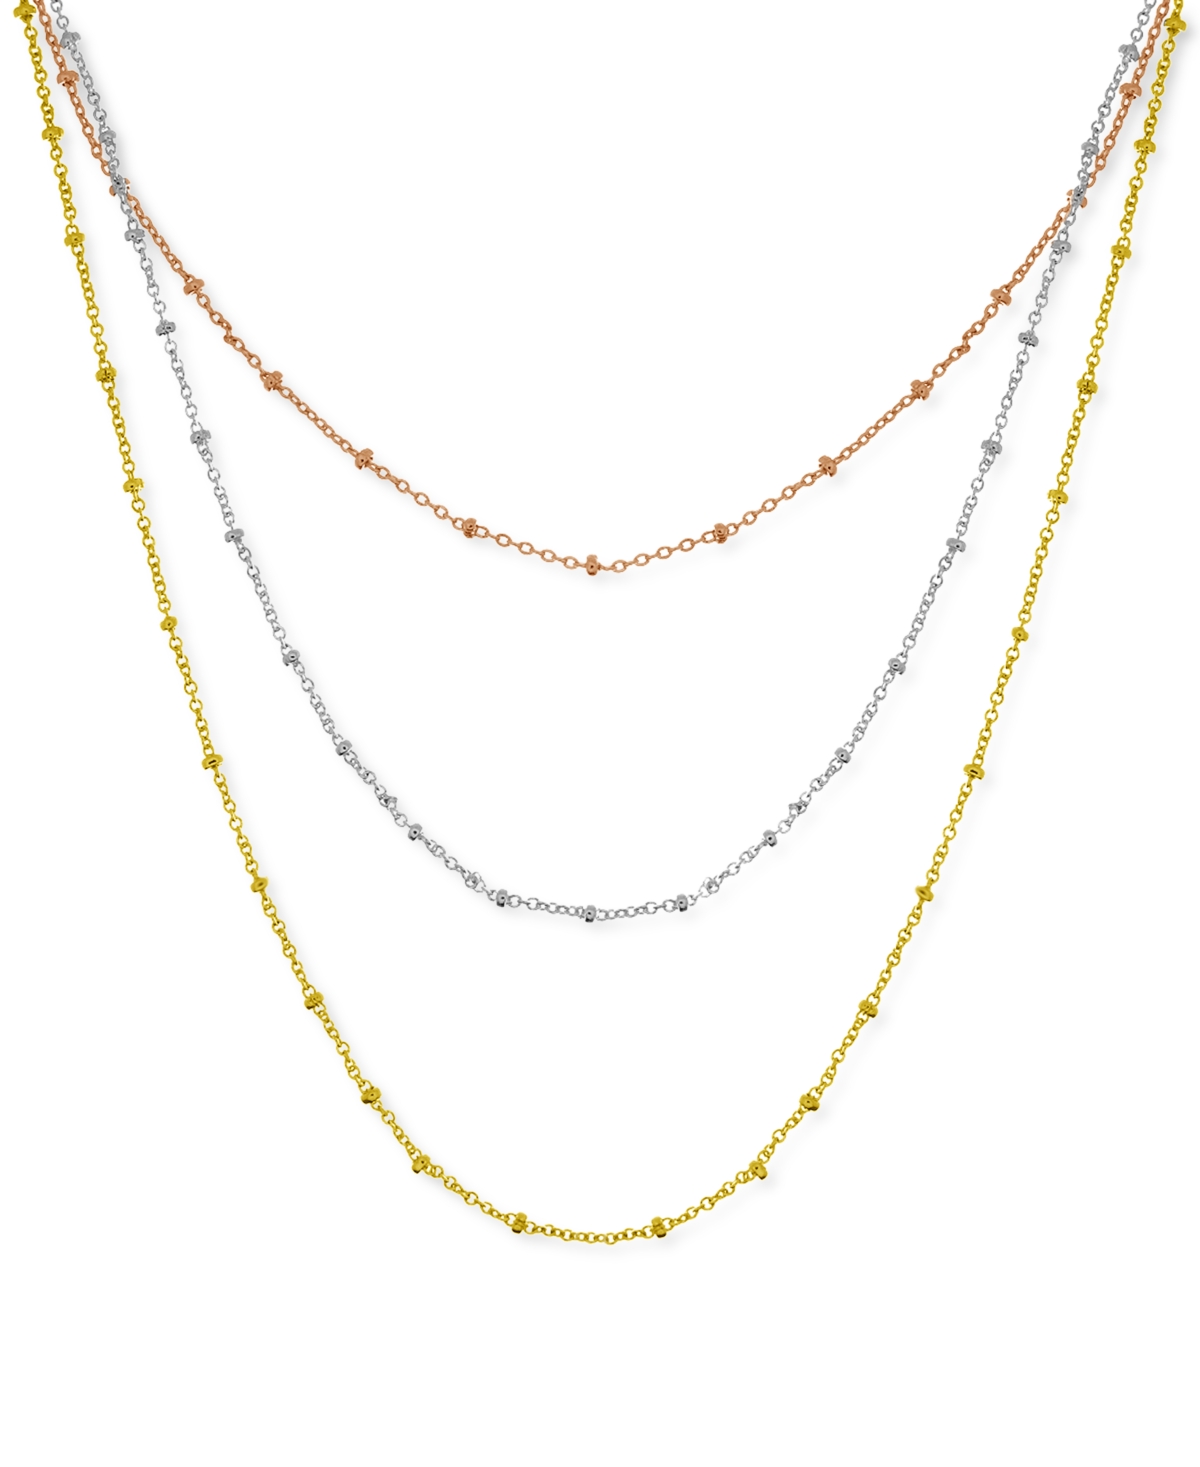 Silver Plated Beaded 18" Layered Necklace - Tri-tone